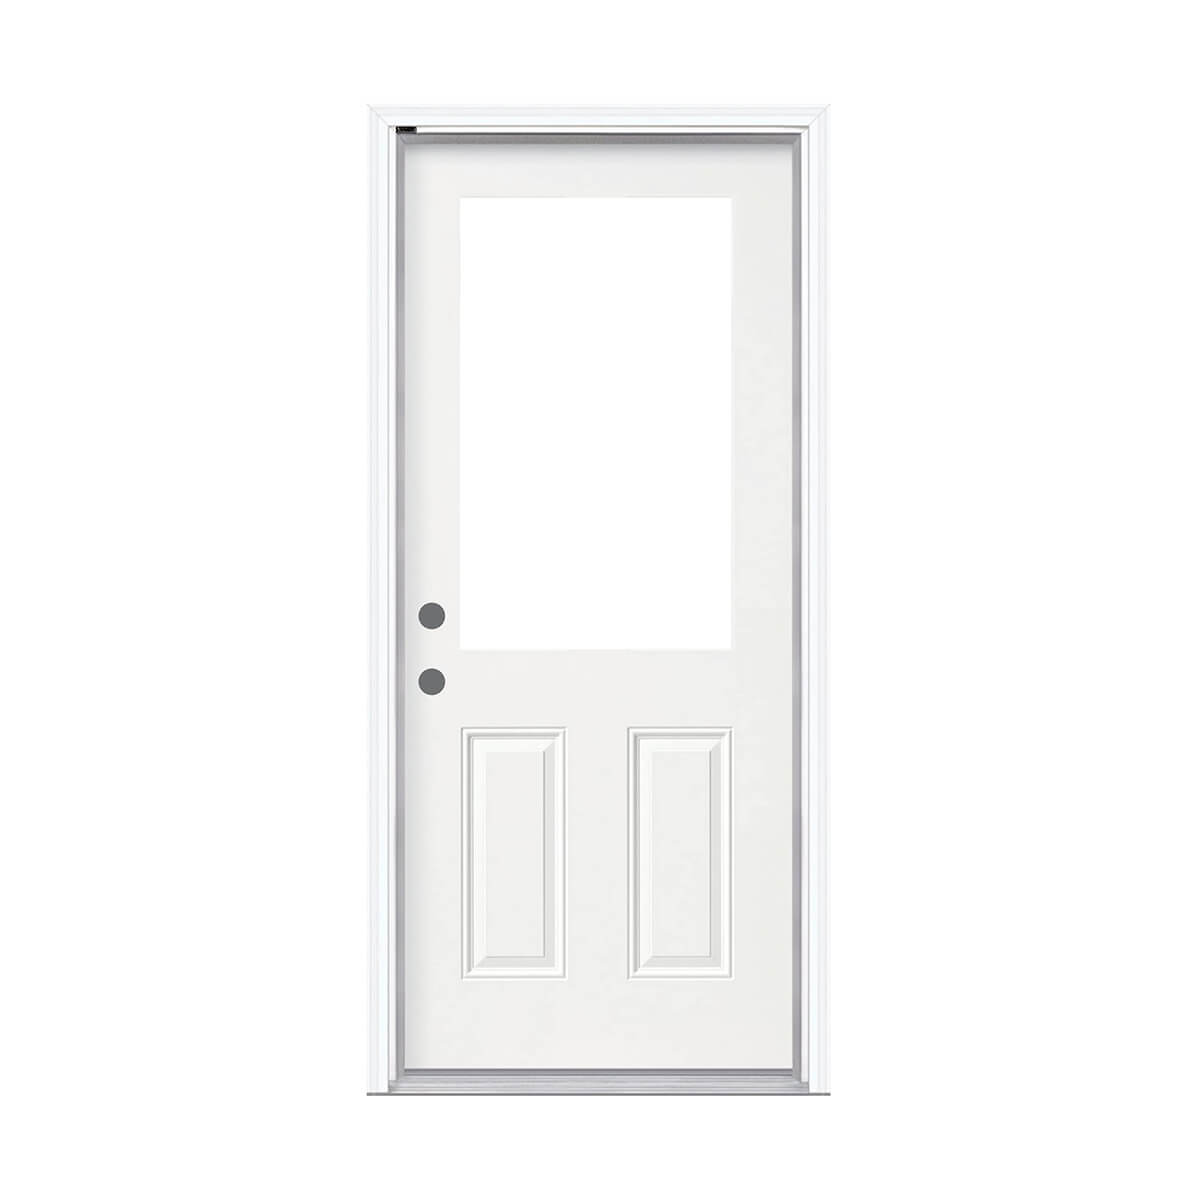 Steel Entry Door With 1/2 Lite Cutout - 2x6 FJ Pine Jamb - Left Hand Inswing - Double Drill